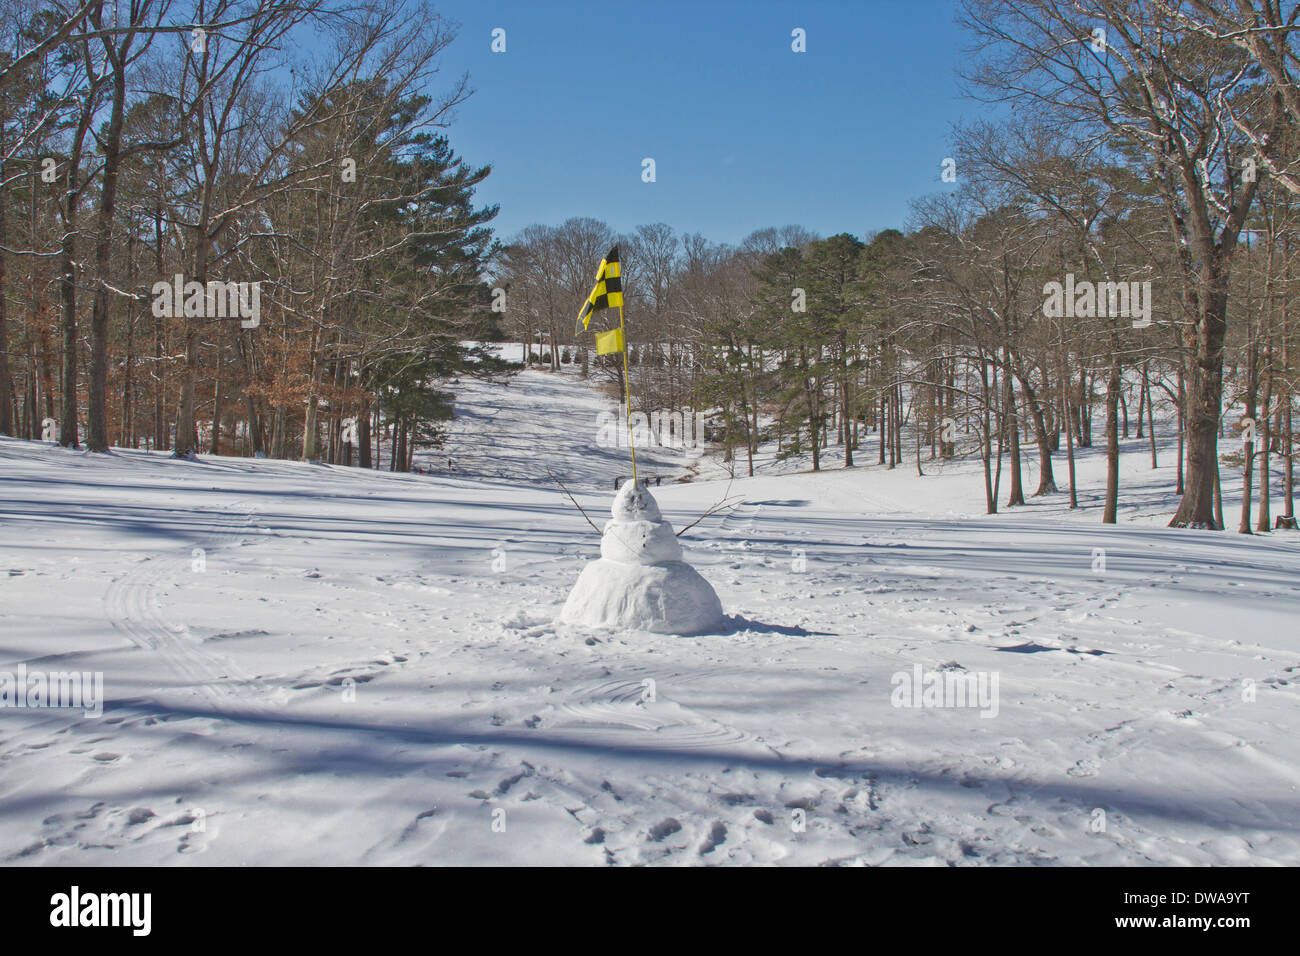 A snowman with a golf flag in its head welcome you to a snowy golf course Stock Photo